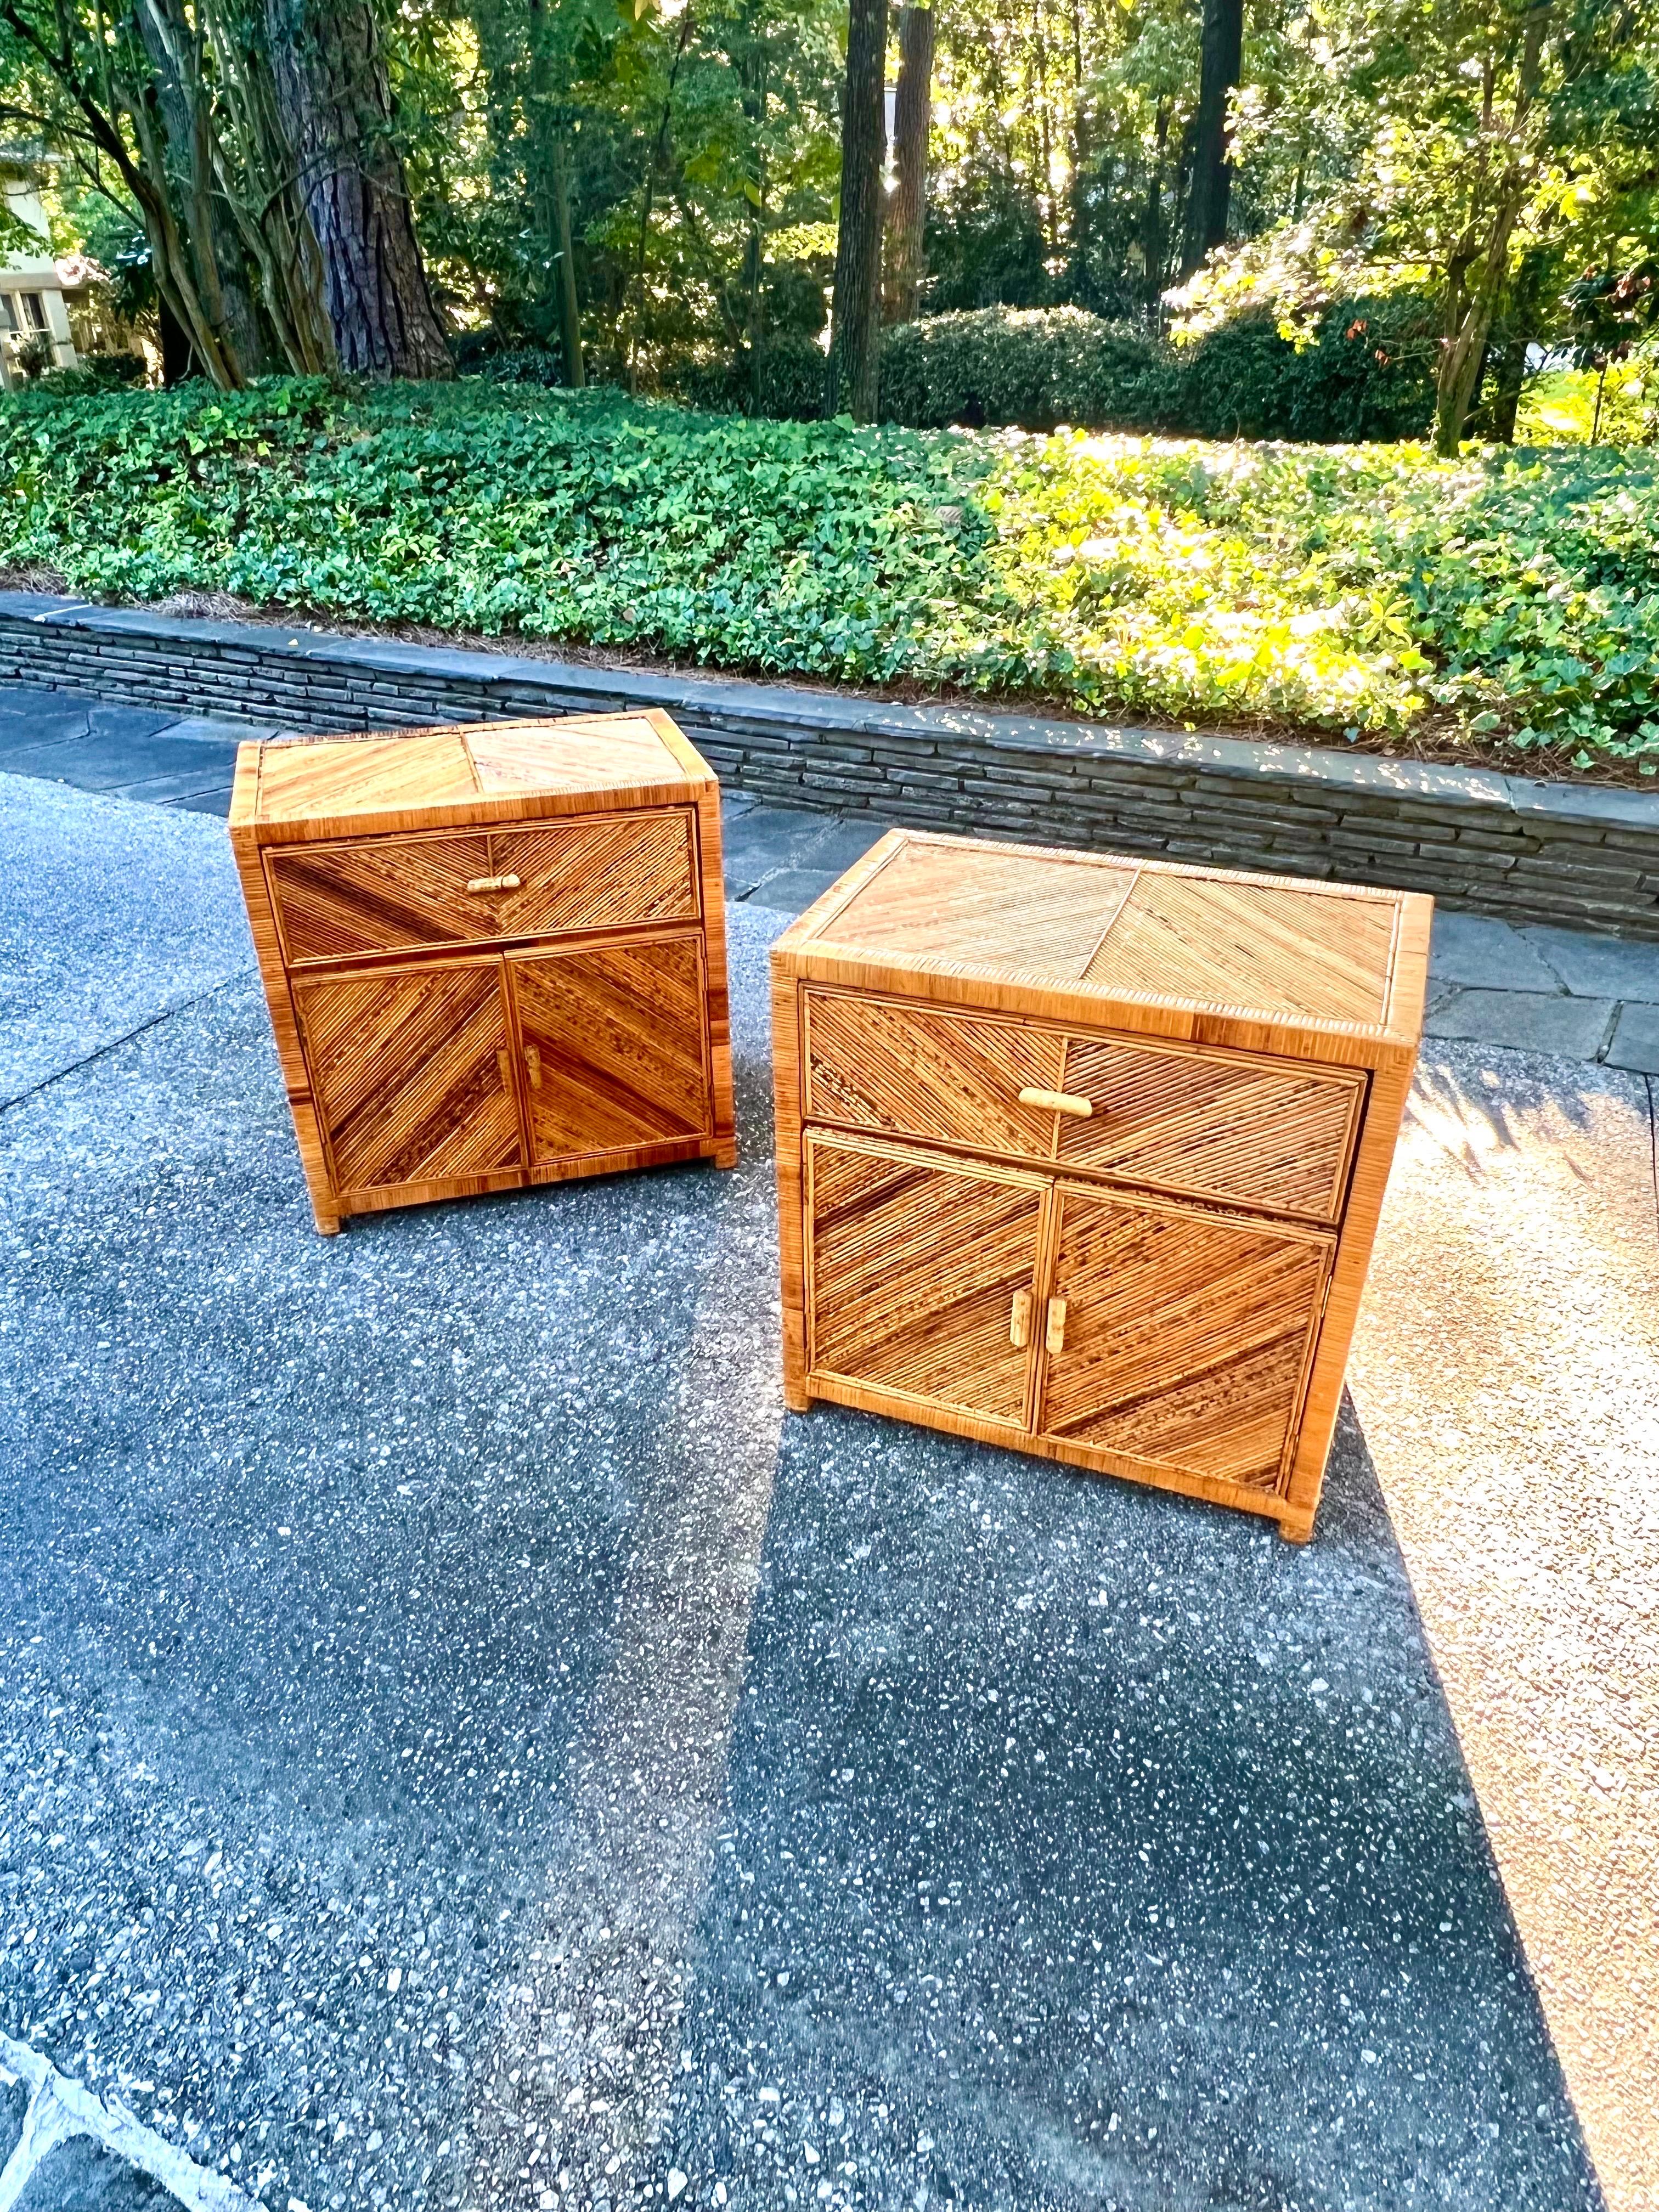 These magnificent commodes are shipped as professionally photographed and described in the listing narrative: Meticulously professionally restored and completely installation ready.

A breathtaking meticulously restored pair of bamboo marquetry